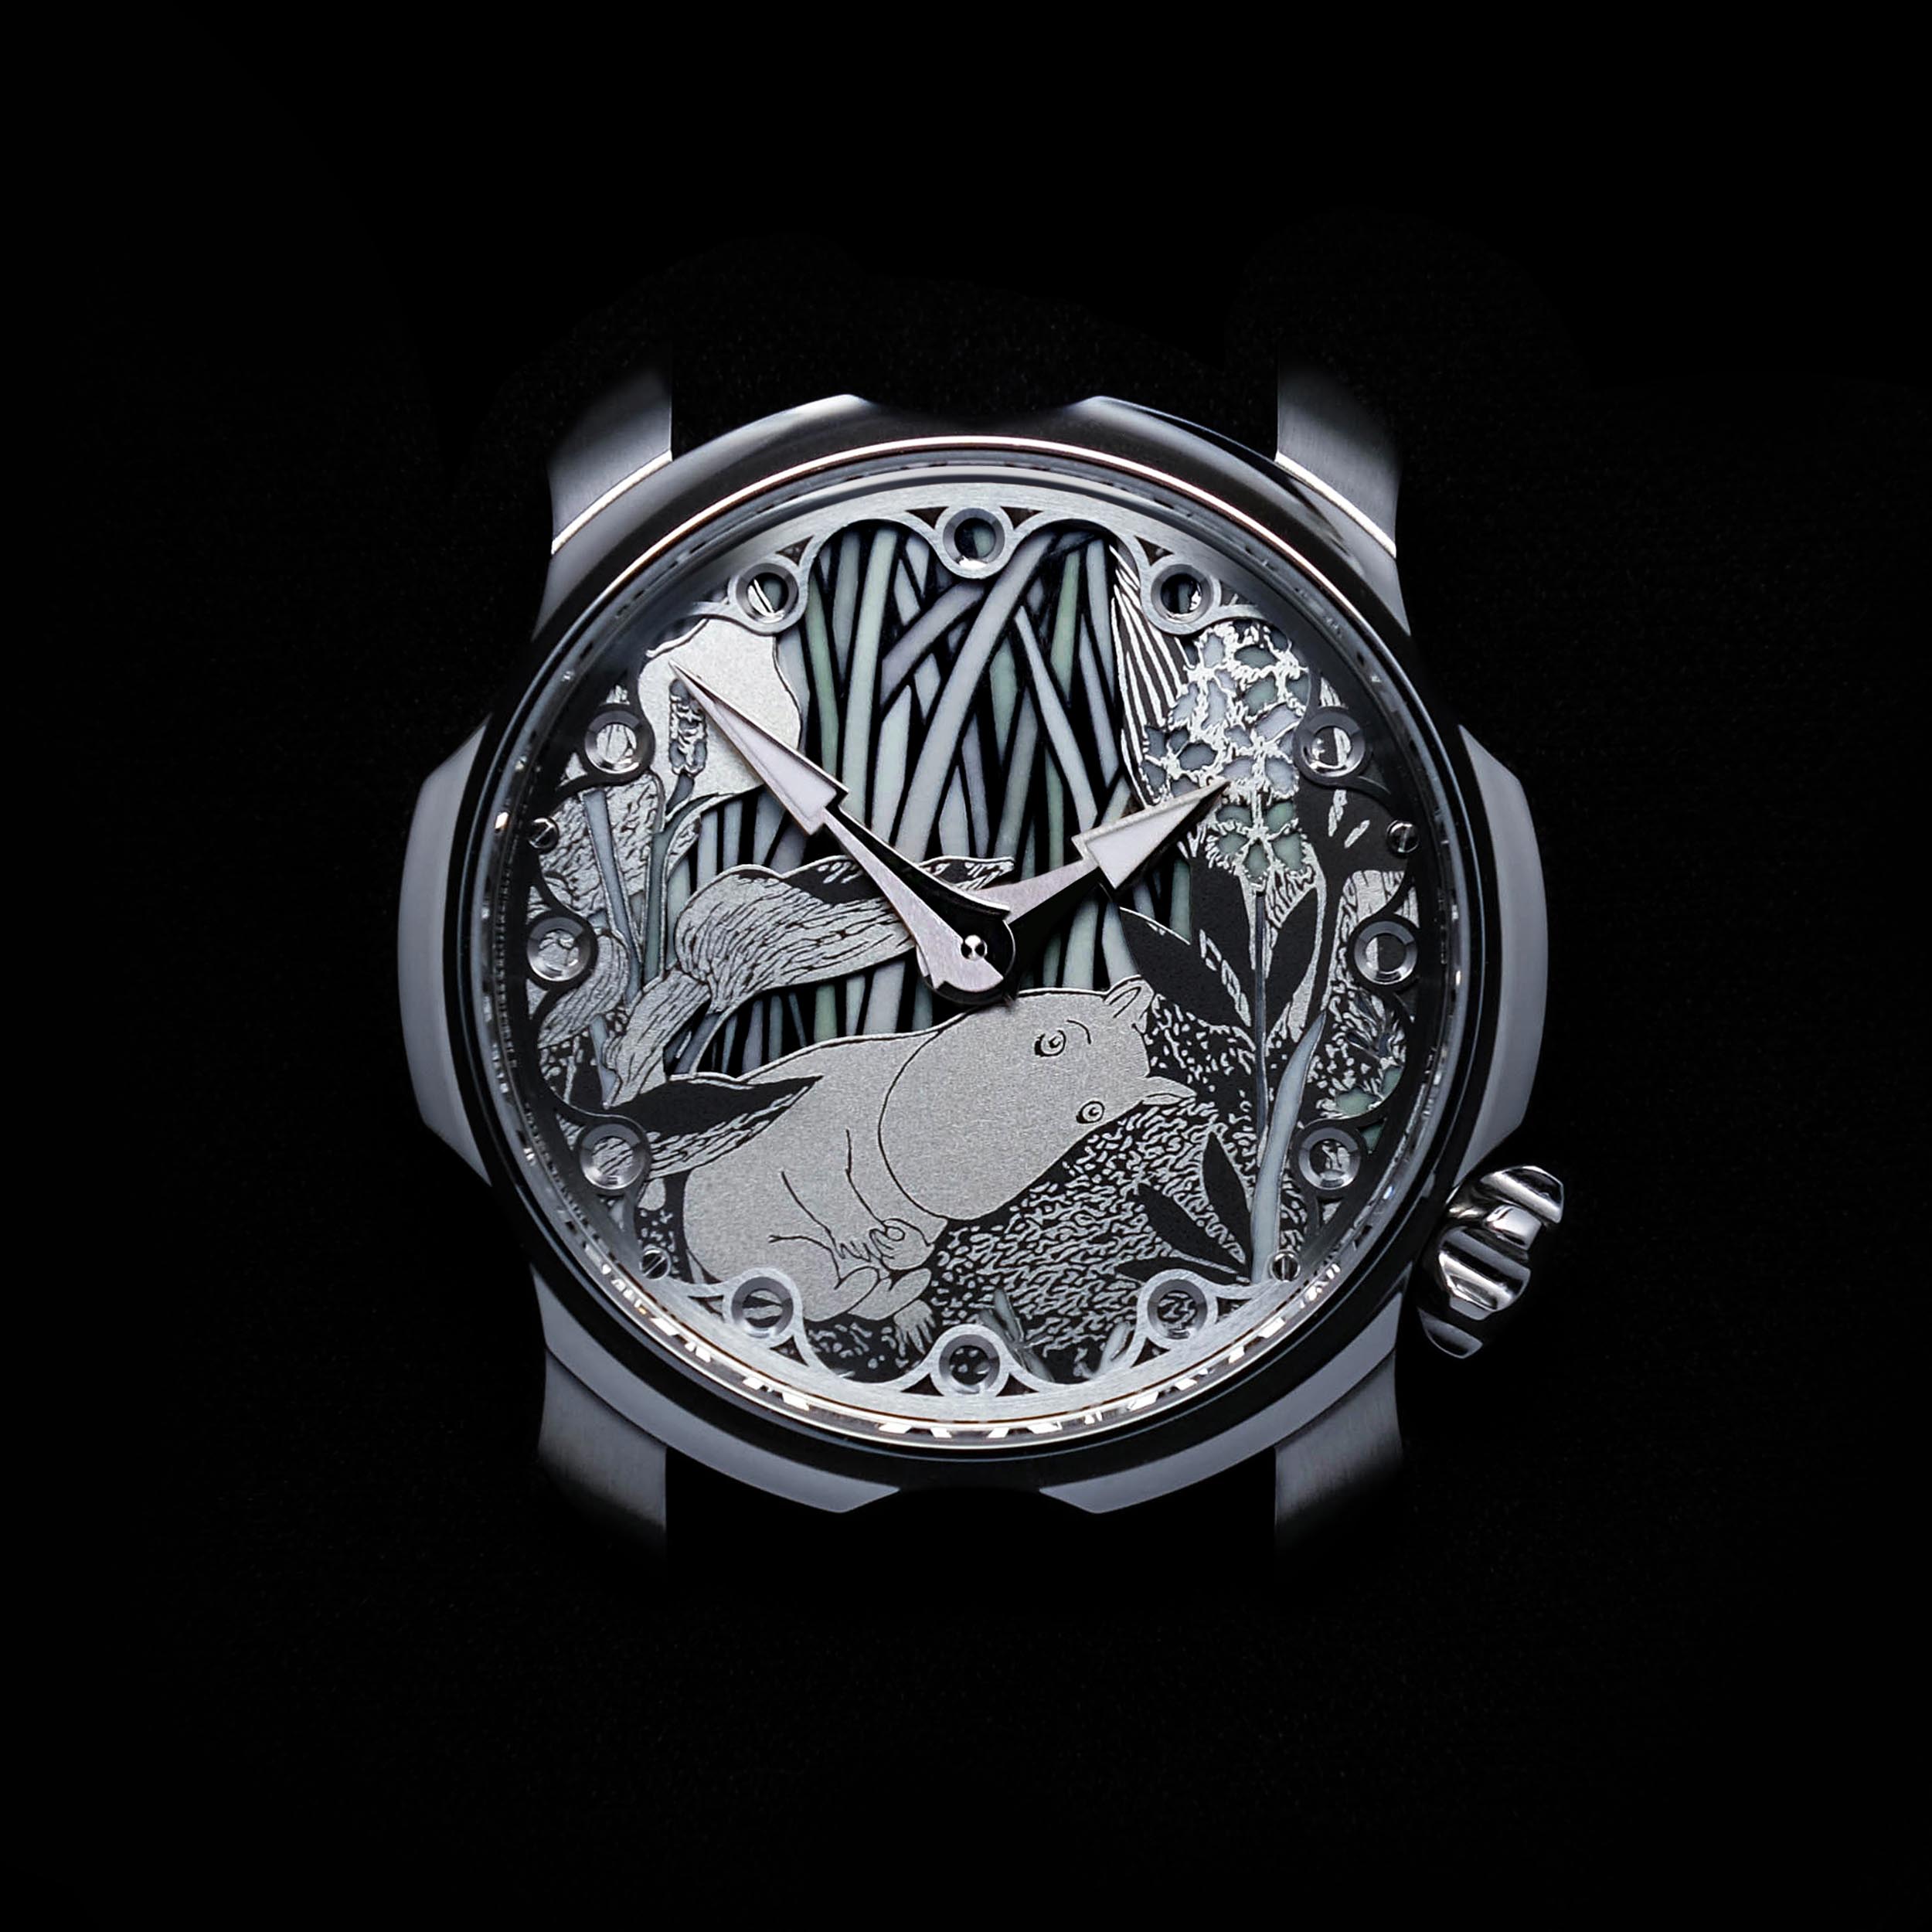 Sarpaneva x Moomin latest watch in limited edition features three-layered skeletonized dials hand-painted with multiple colours of Super-LumiNova